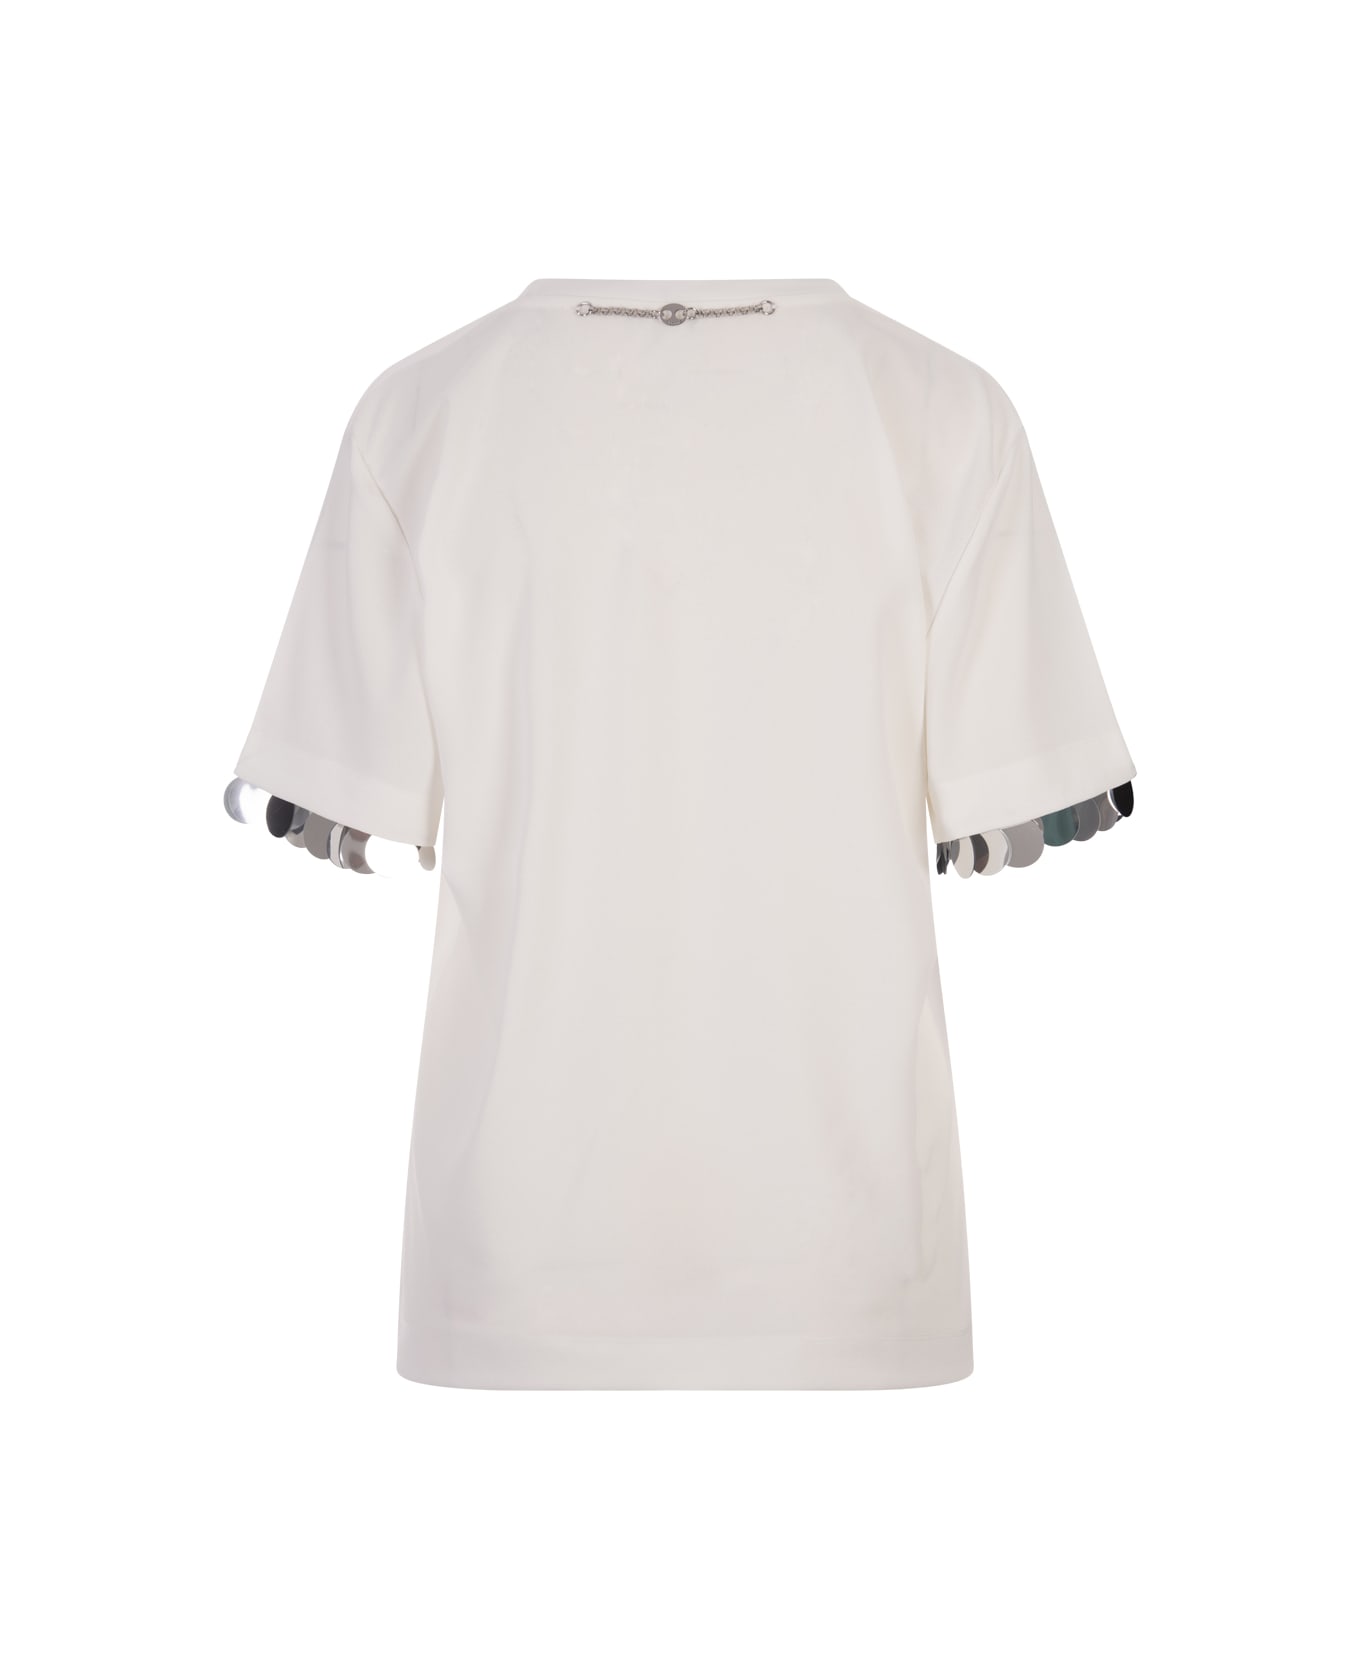 Paco Rabanne White T-shirt With Sequins On Bottom Sleeve - White